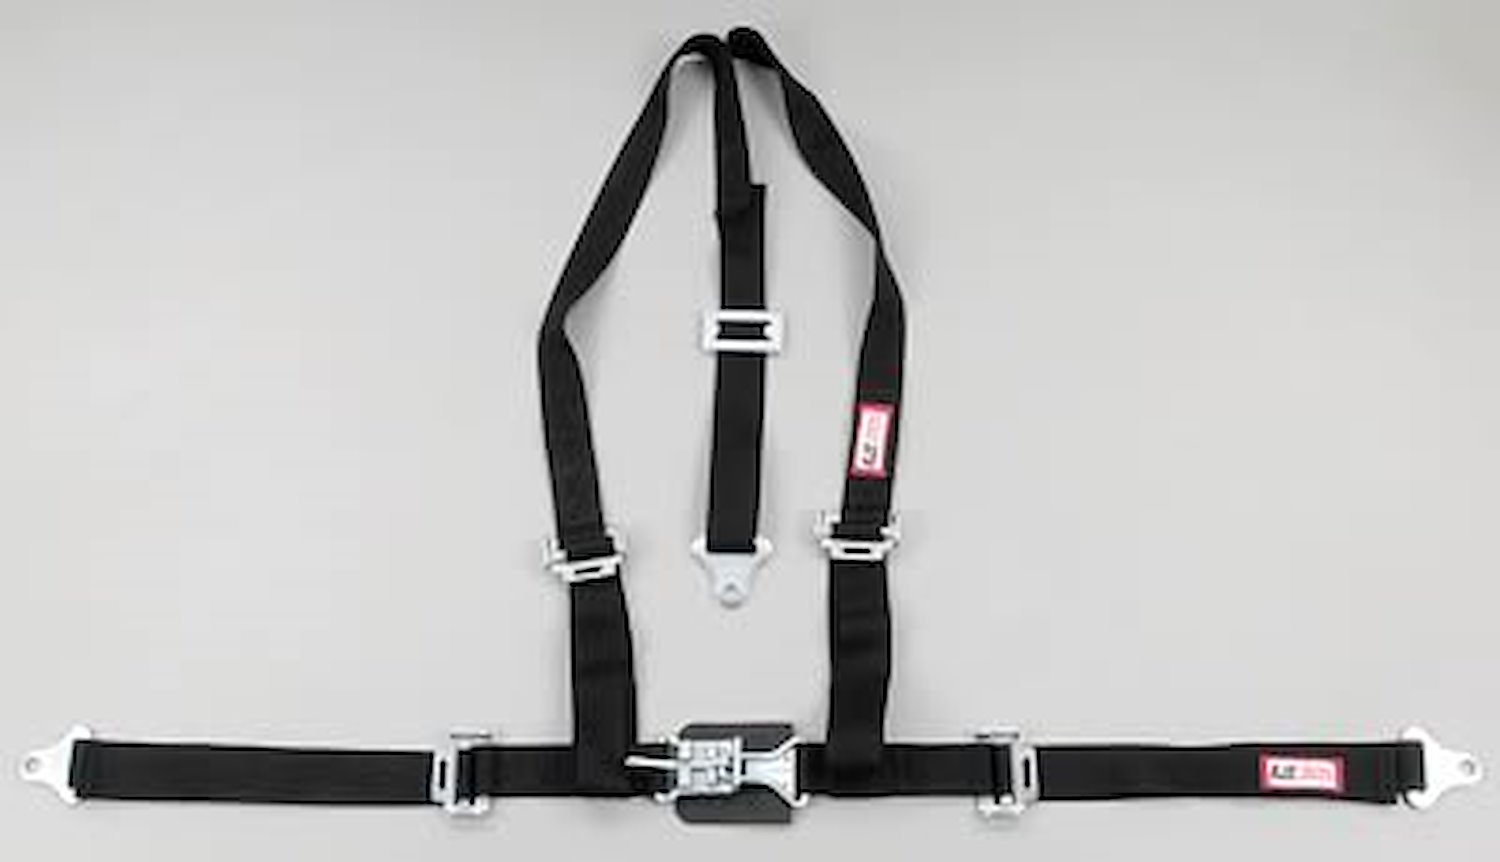 NON-SFI L&L HARNESS 3 PULL DOWN Lap Belt SEWN IN 2 S.H. Individual FLOOR Mount w/STERNUM STRAP ALL WRAP ENDS GRAY